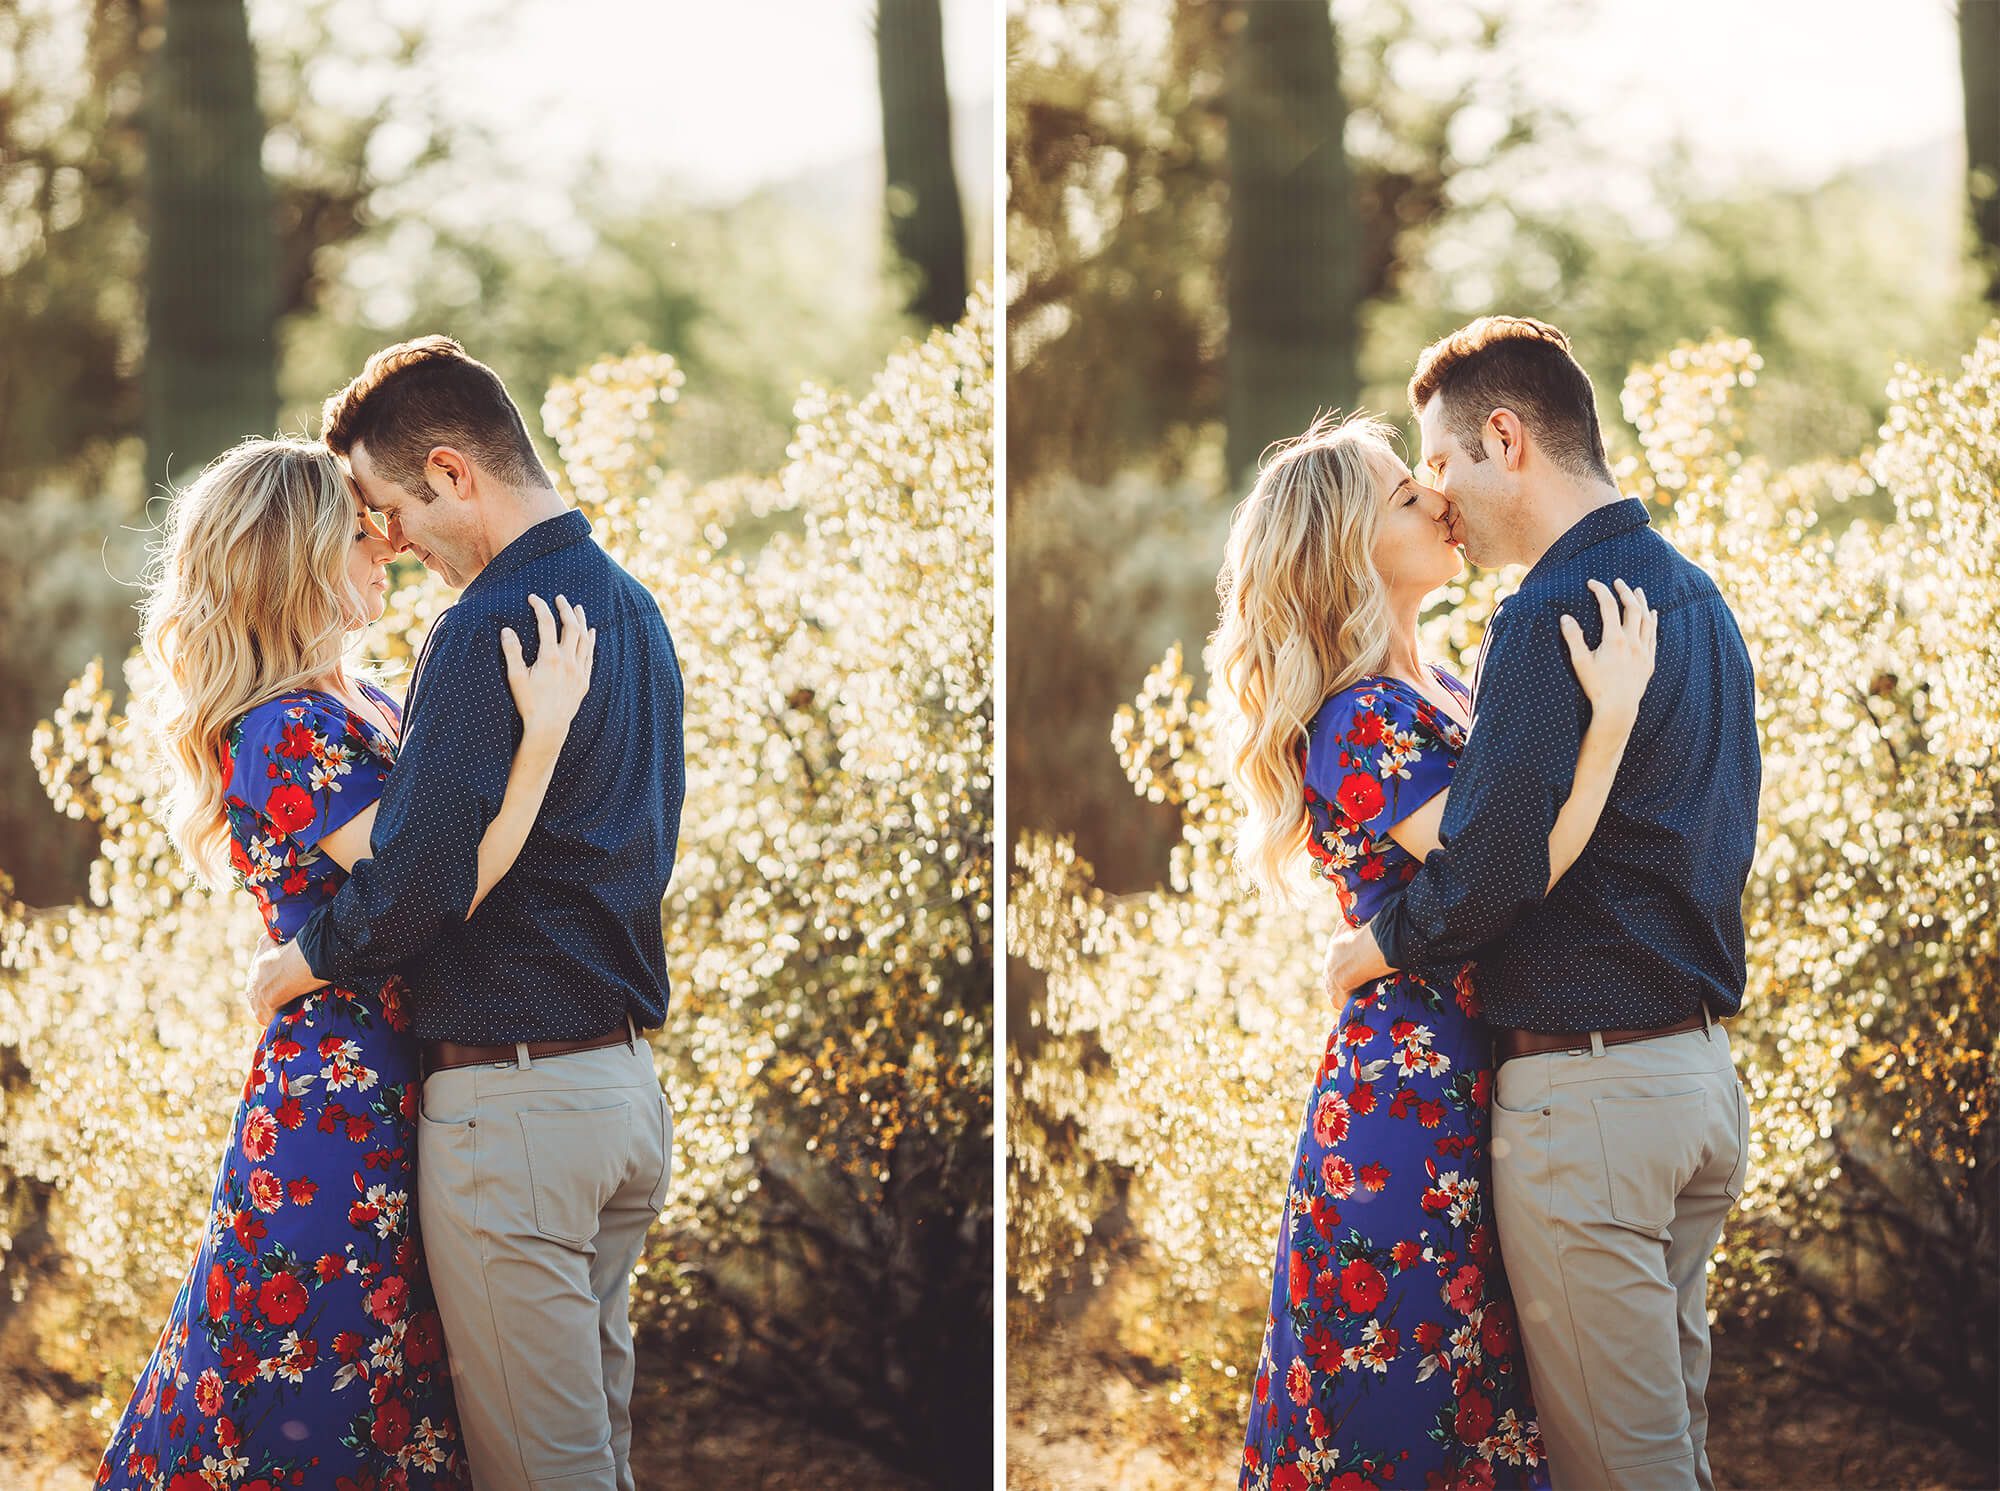 Loving affection between Shaun and Ally at Sabino Canyon during their spring engagement session